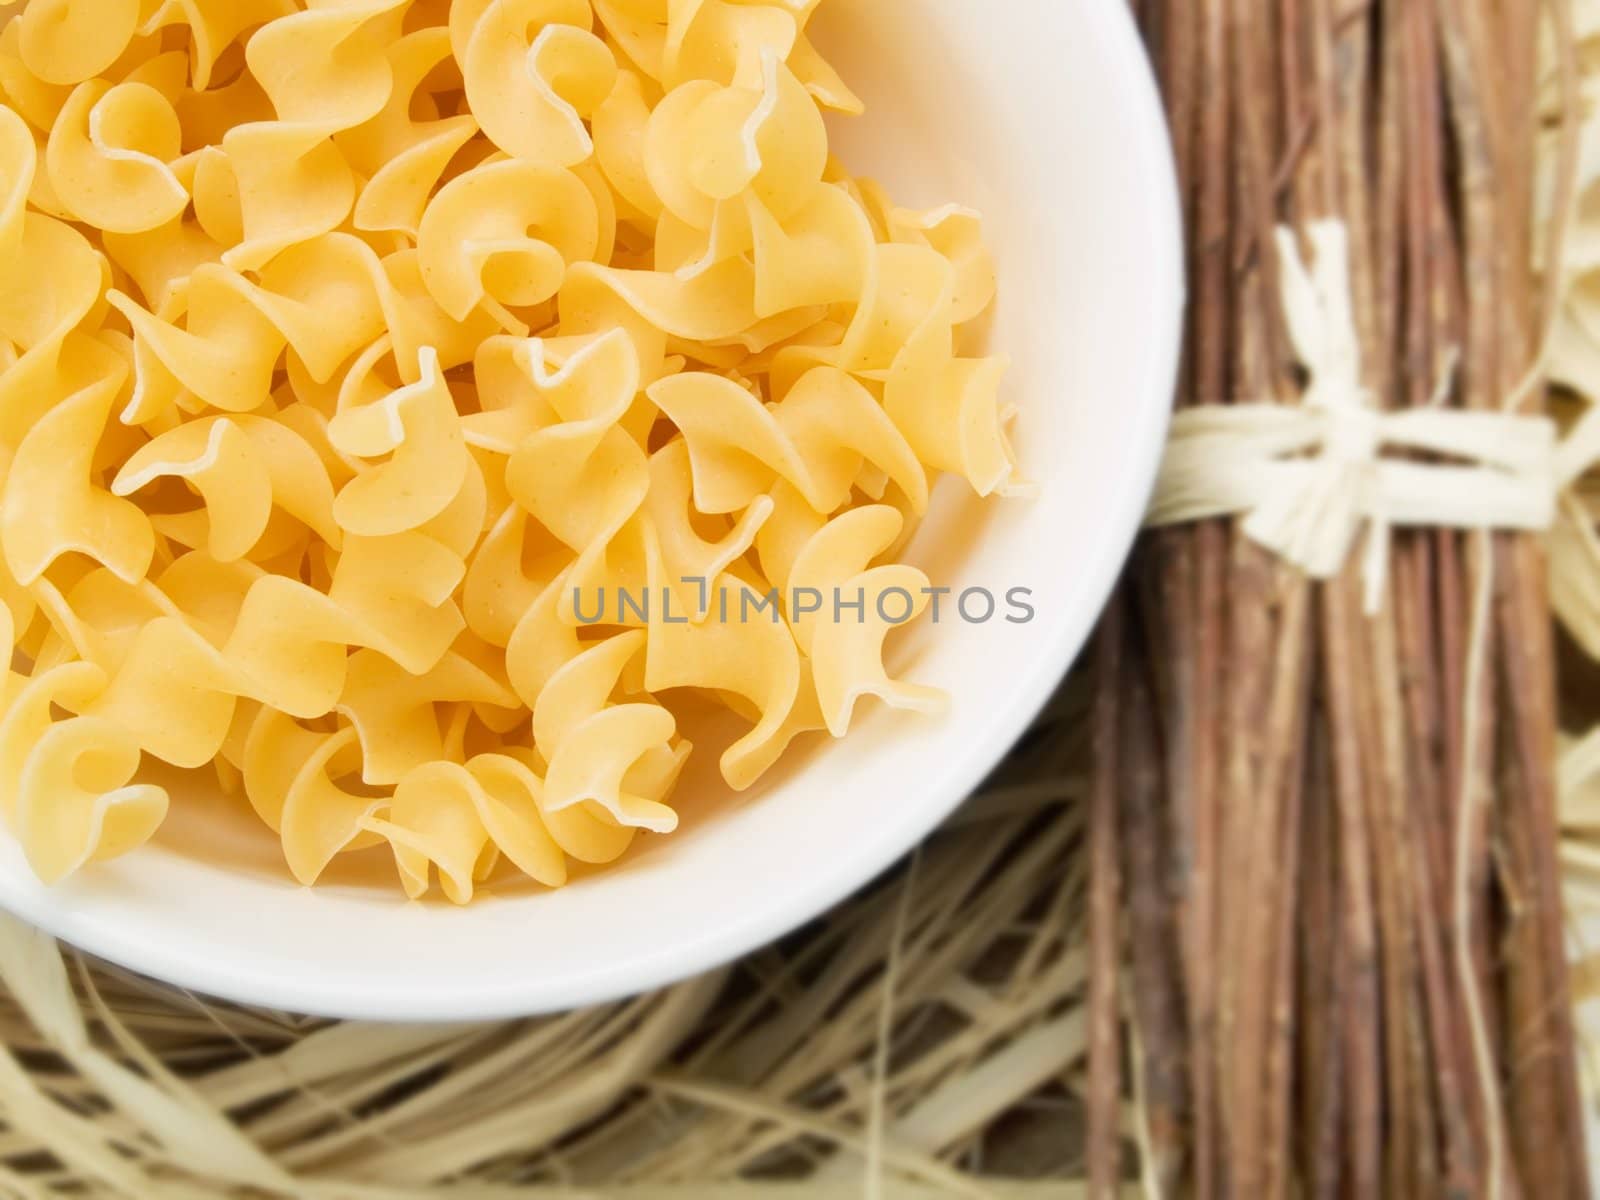 Pasta in a white bowl